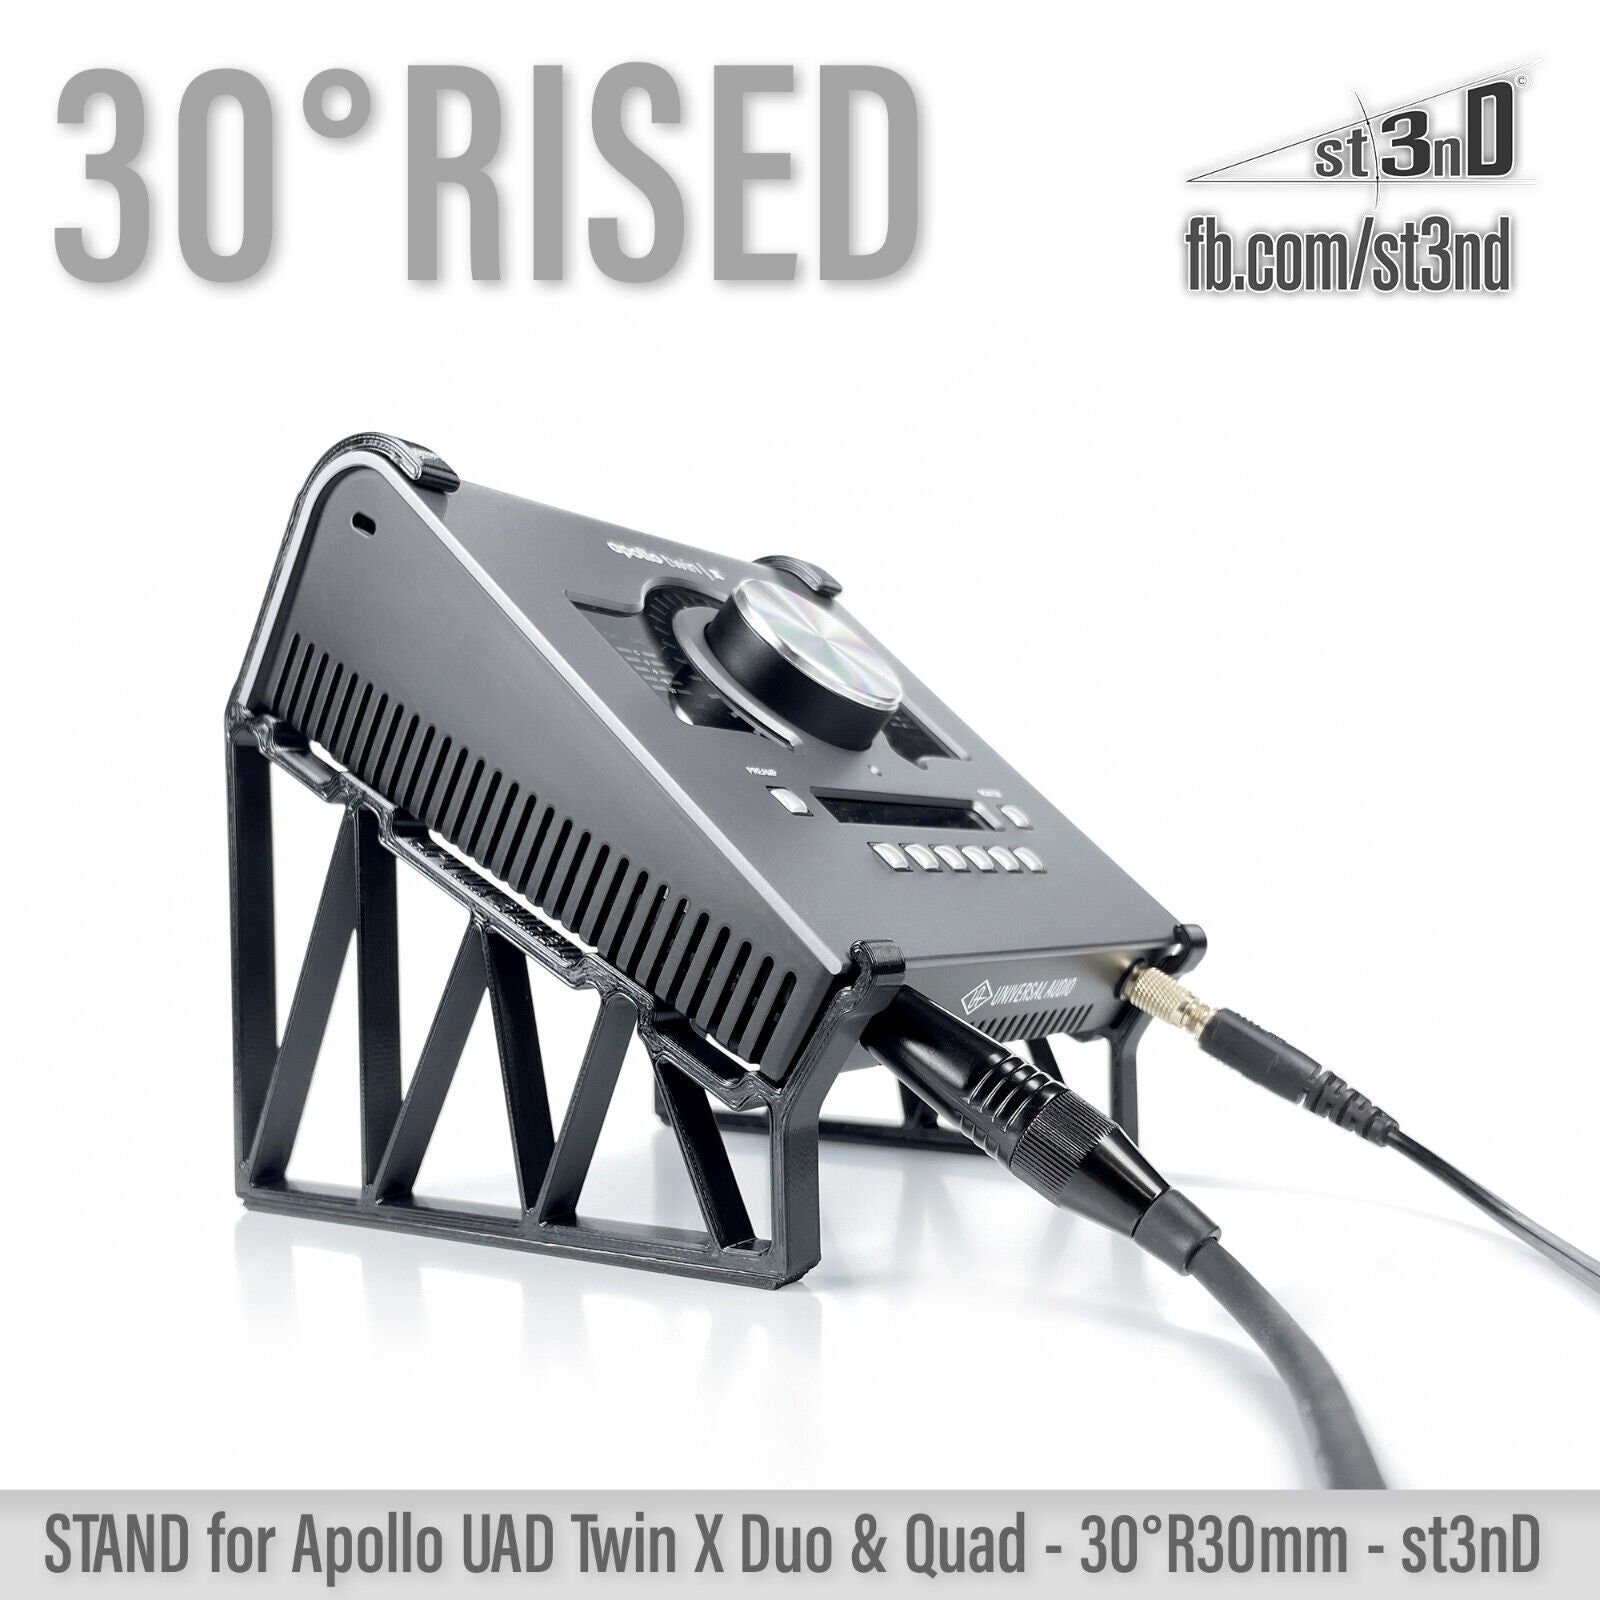 STAND for UAD APOLLO Twin X Duo & Quad - 30° Rised By 30mm - 3D printed -  st3nD